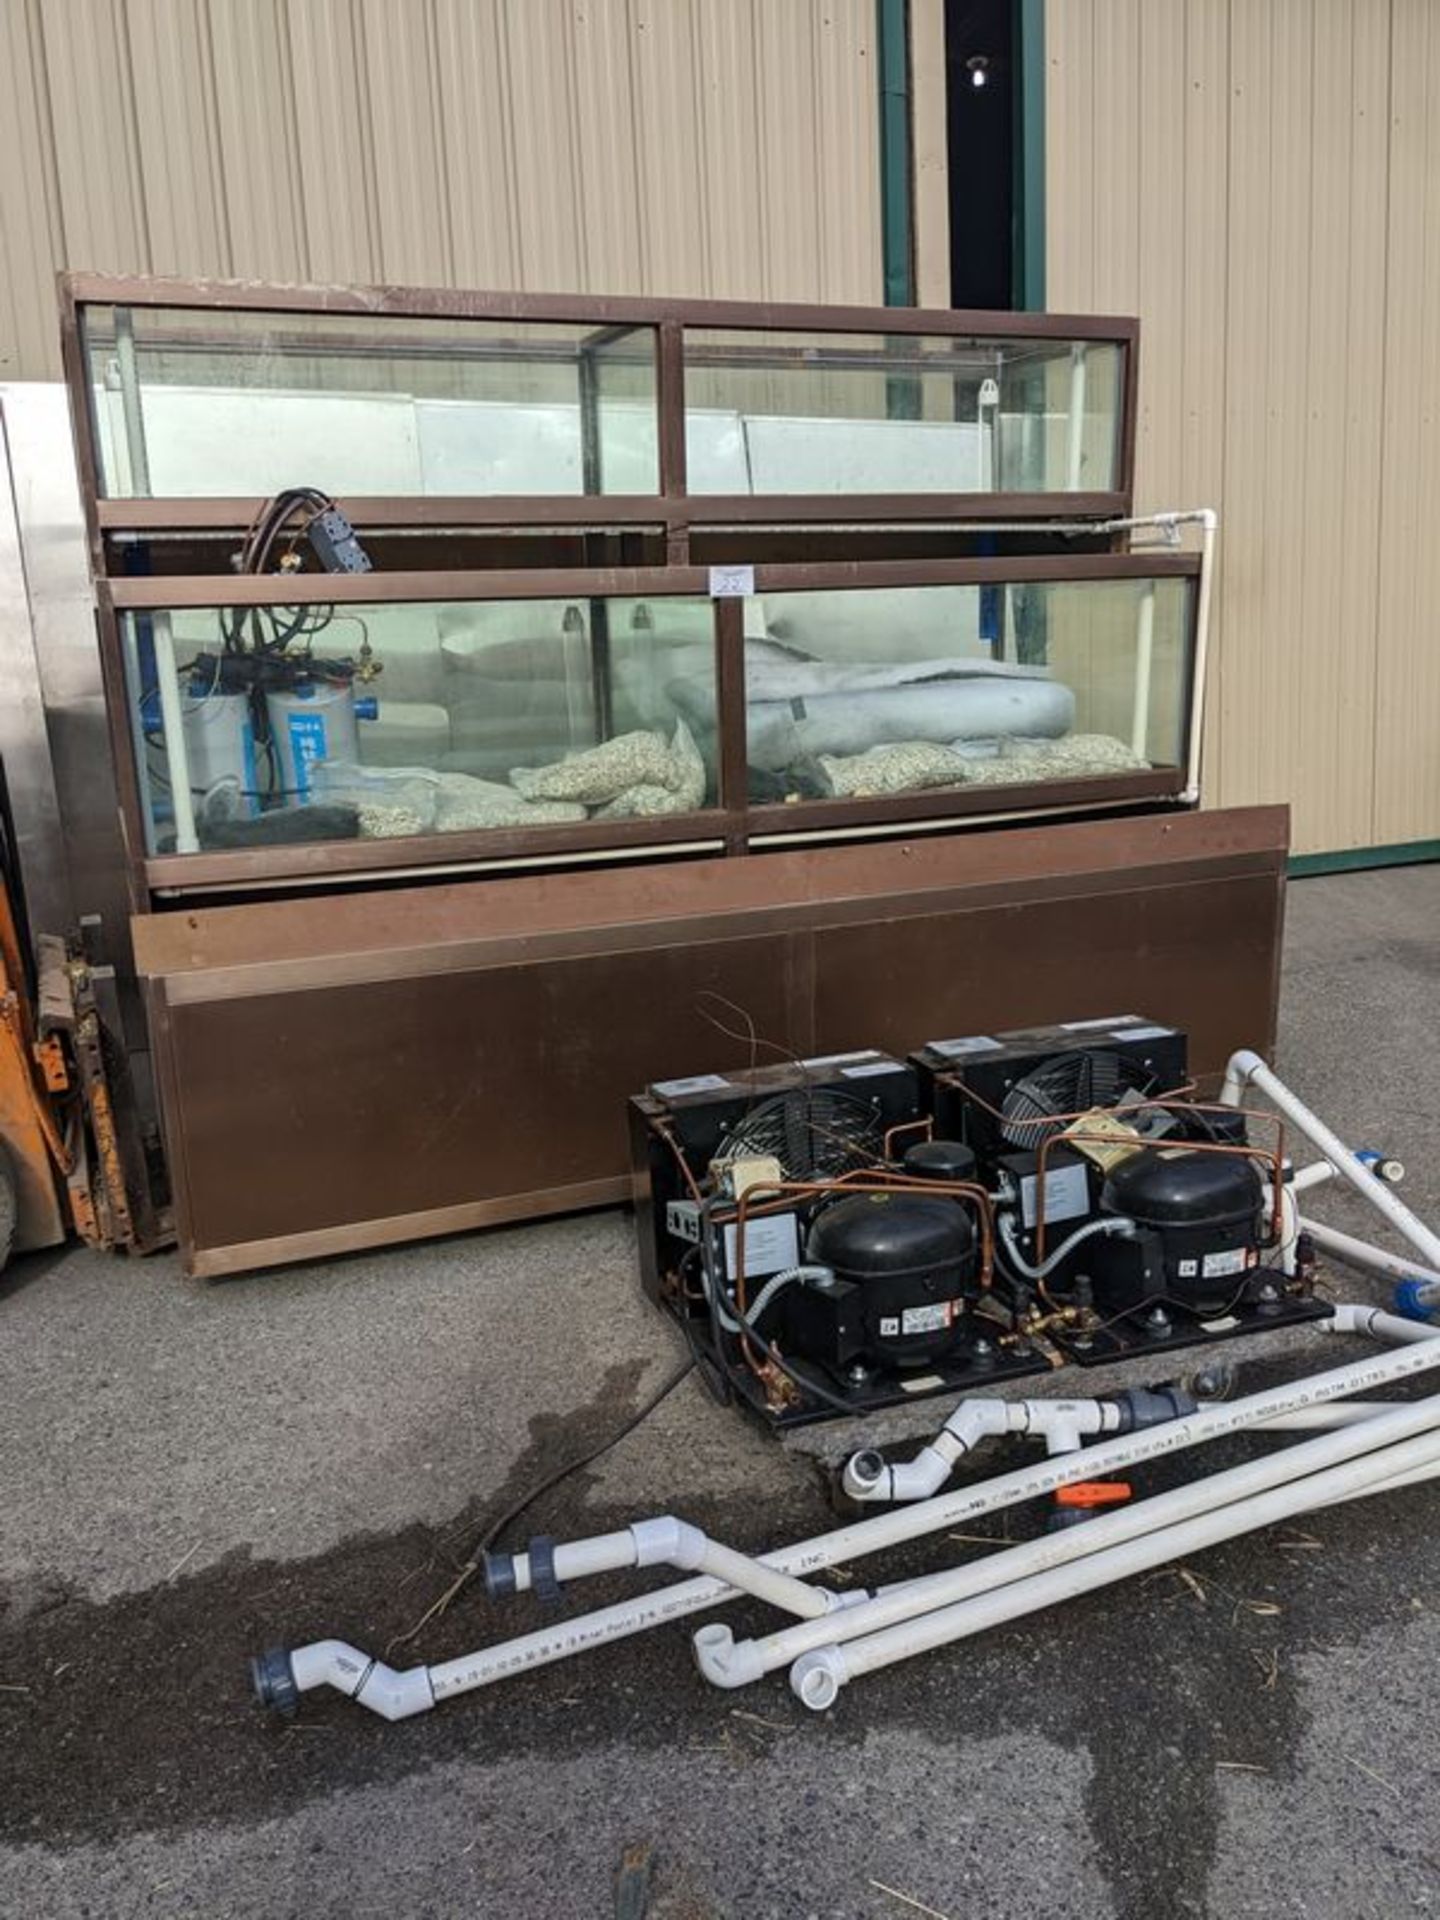 8ft Copper Live Tank with 2 Compressors and Pumps - New in 2020